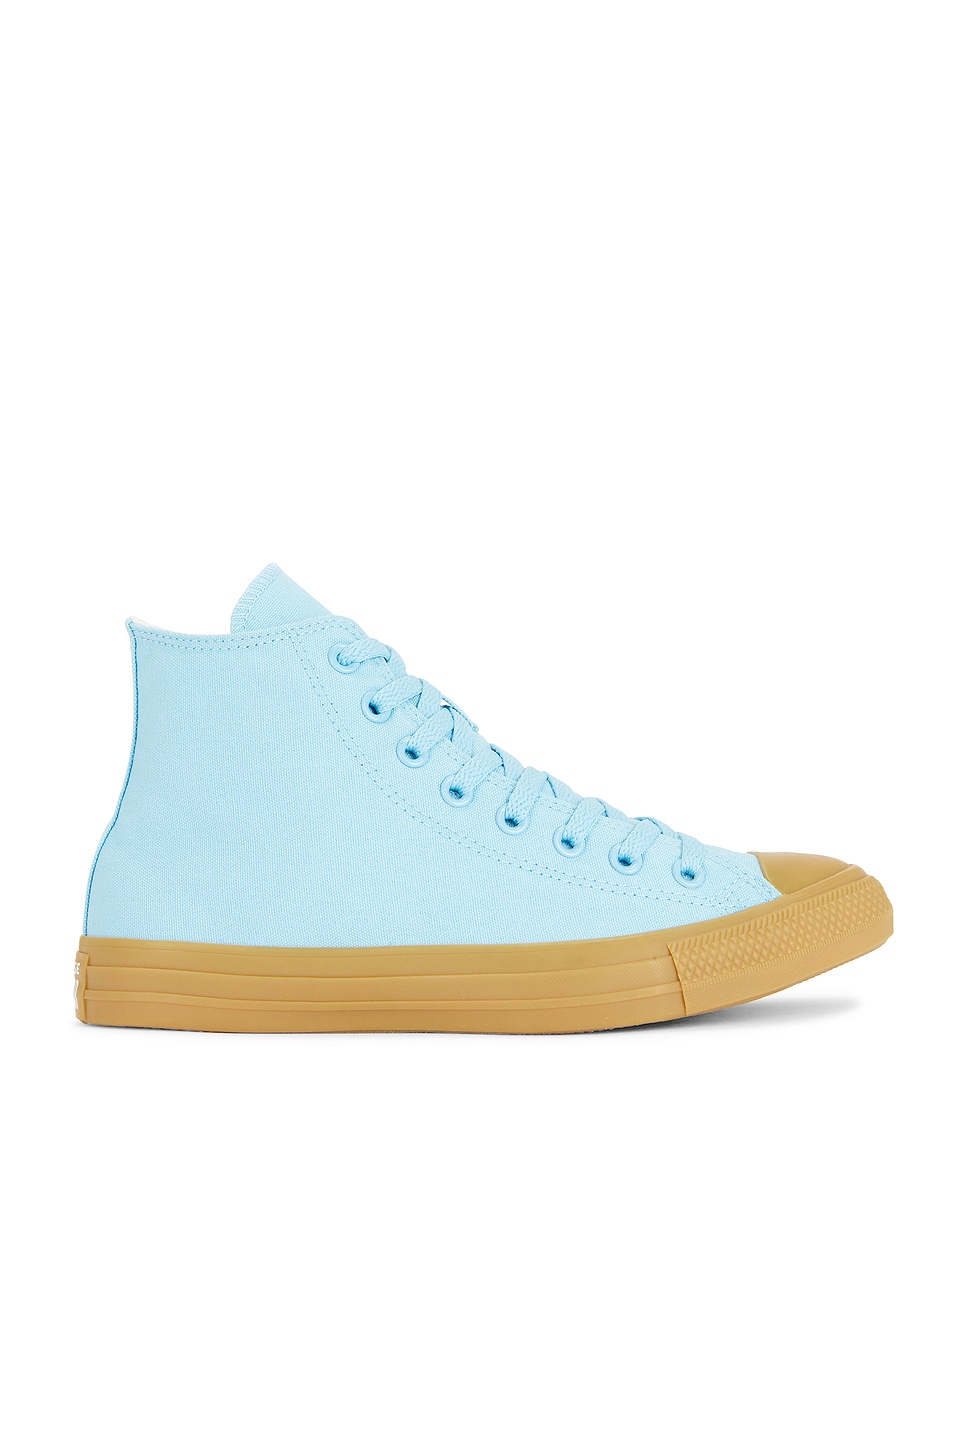 Image 1 of Converse Chuck Taylor All Star in True Sky, Vintage White, & Light Gum